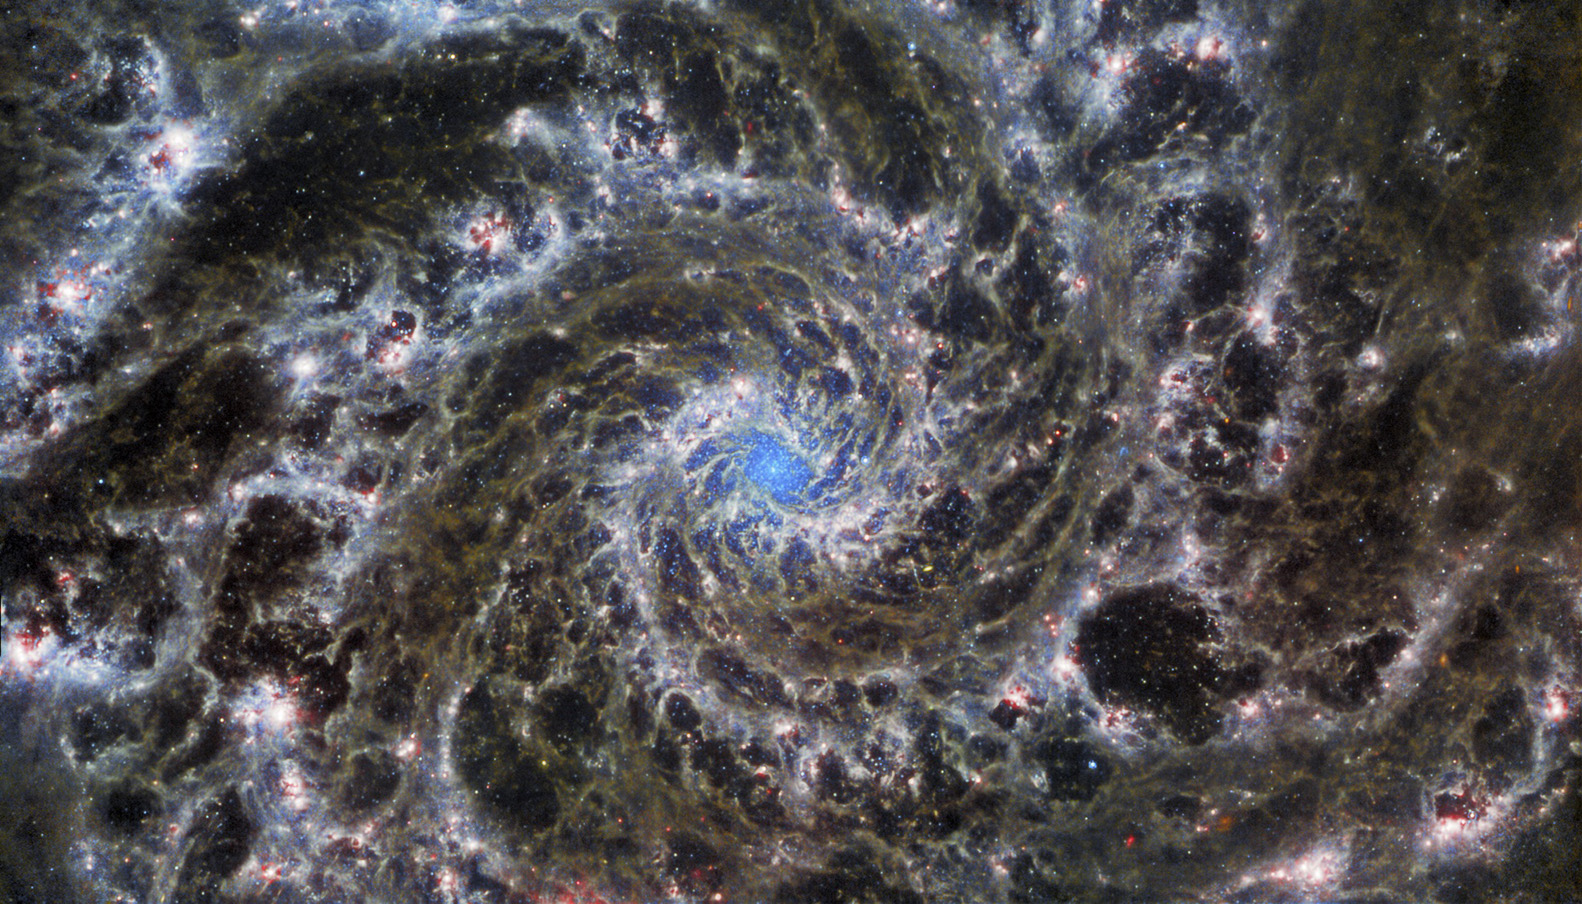 Featured in the IMAX® documentary DEEP SKY,  this image from JWST shows the heart of M74, otherwise known as the Phantom Galaxy. M74 is a particular class of spiral galaxy known as a ‘grand design spiral’, meaning that its spiral arms are prominent and well-defined, unlike the patchy and ragged structure seen in some spiral galaxies.